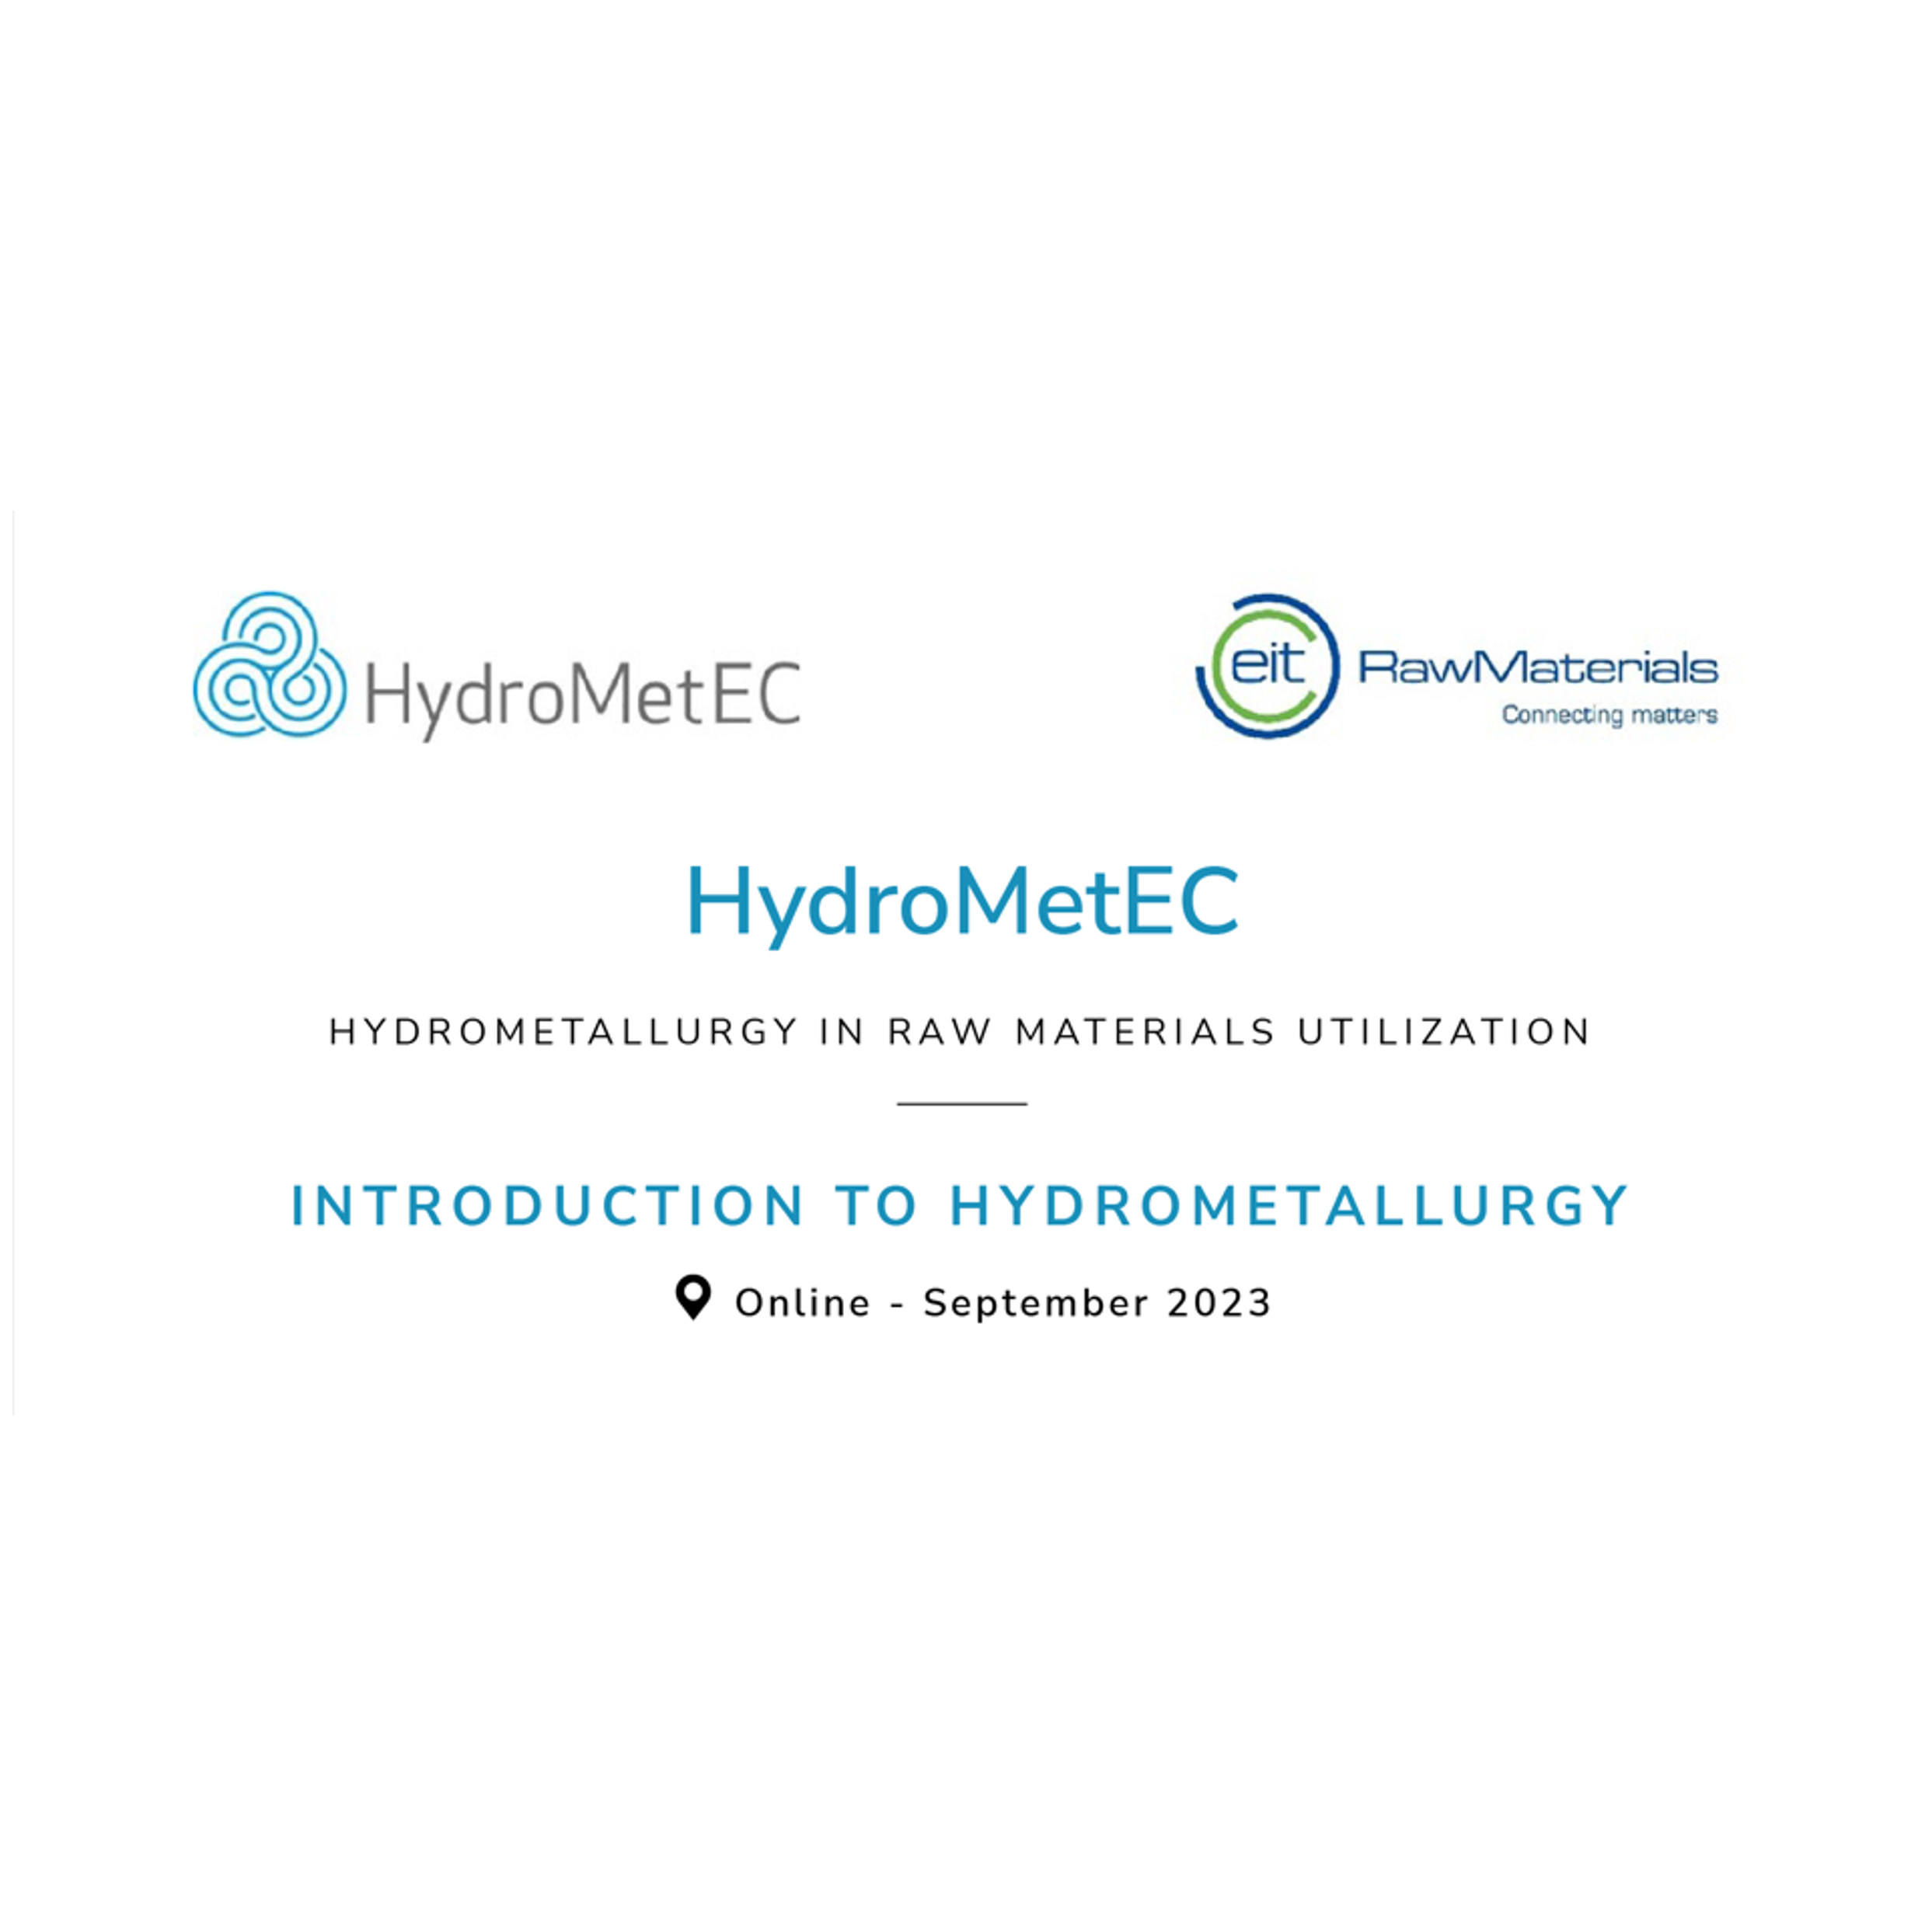 HydroMetEC: Hydrometallurgy in raw materials utilization – an educational and communication programme